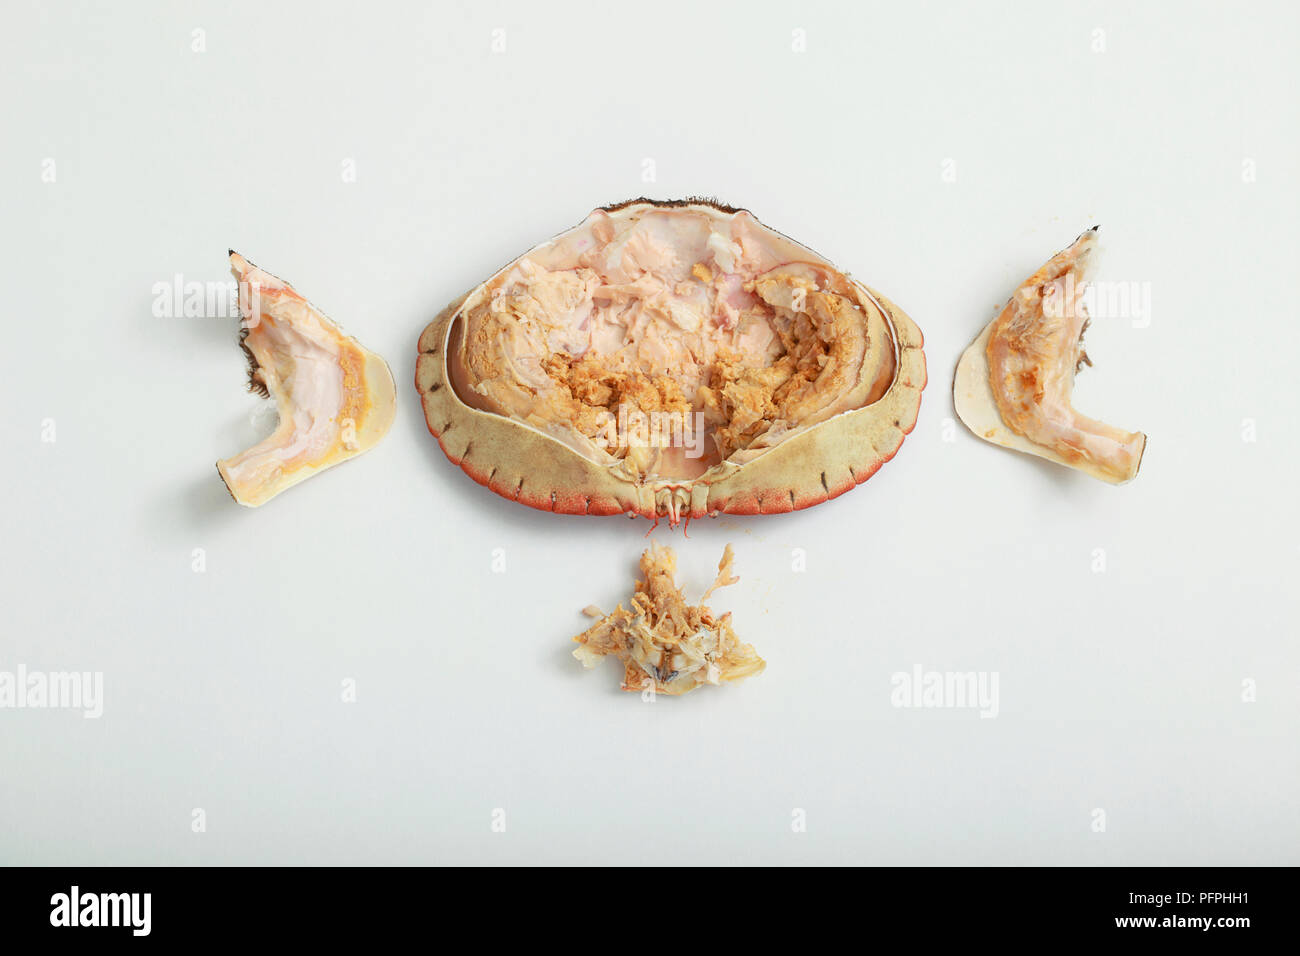 Cooked crab carapace and crab meat Stock Photo